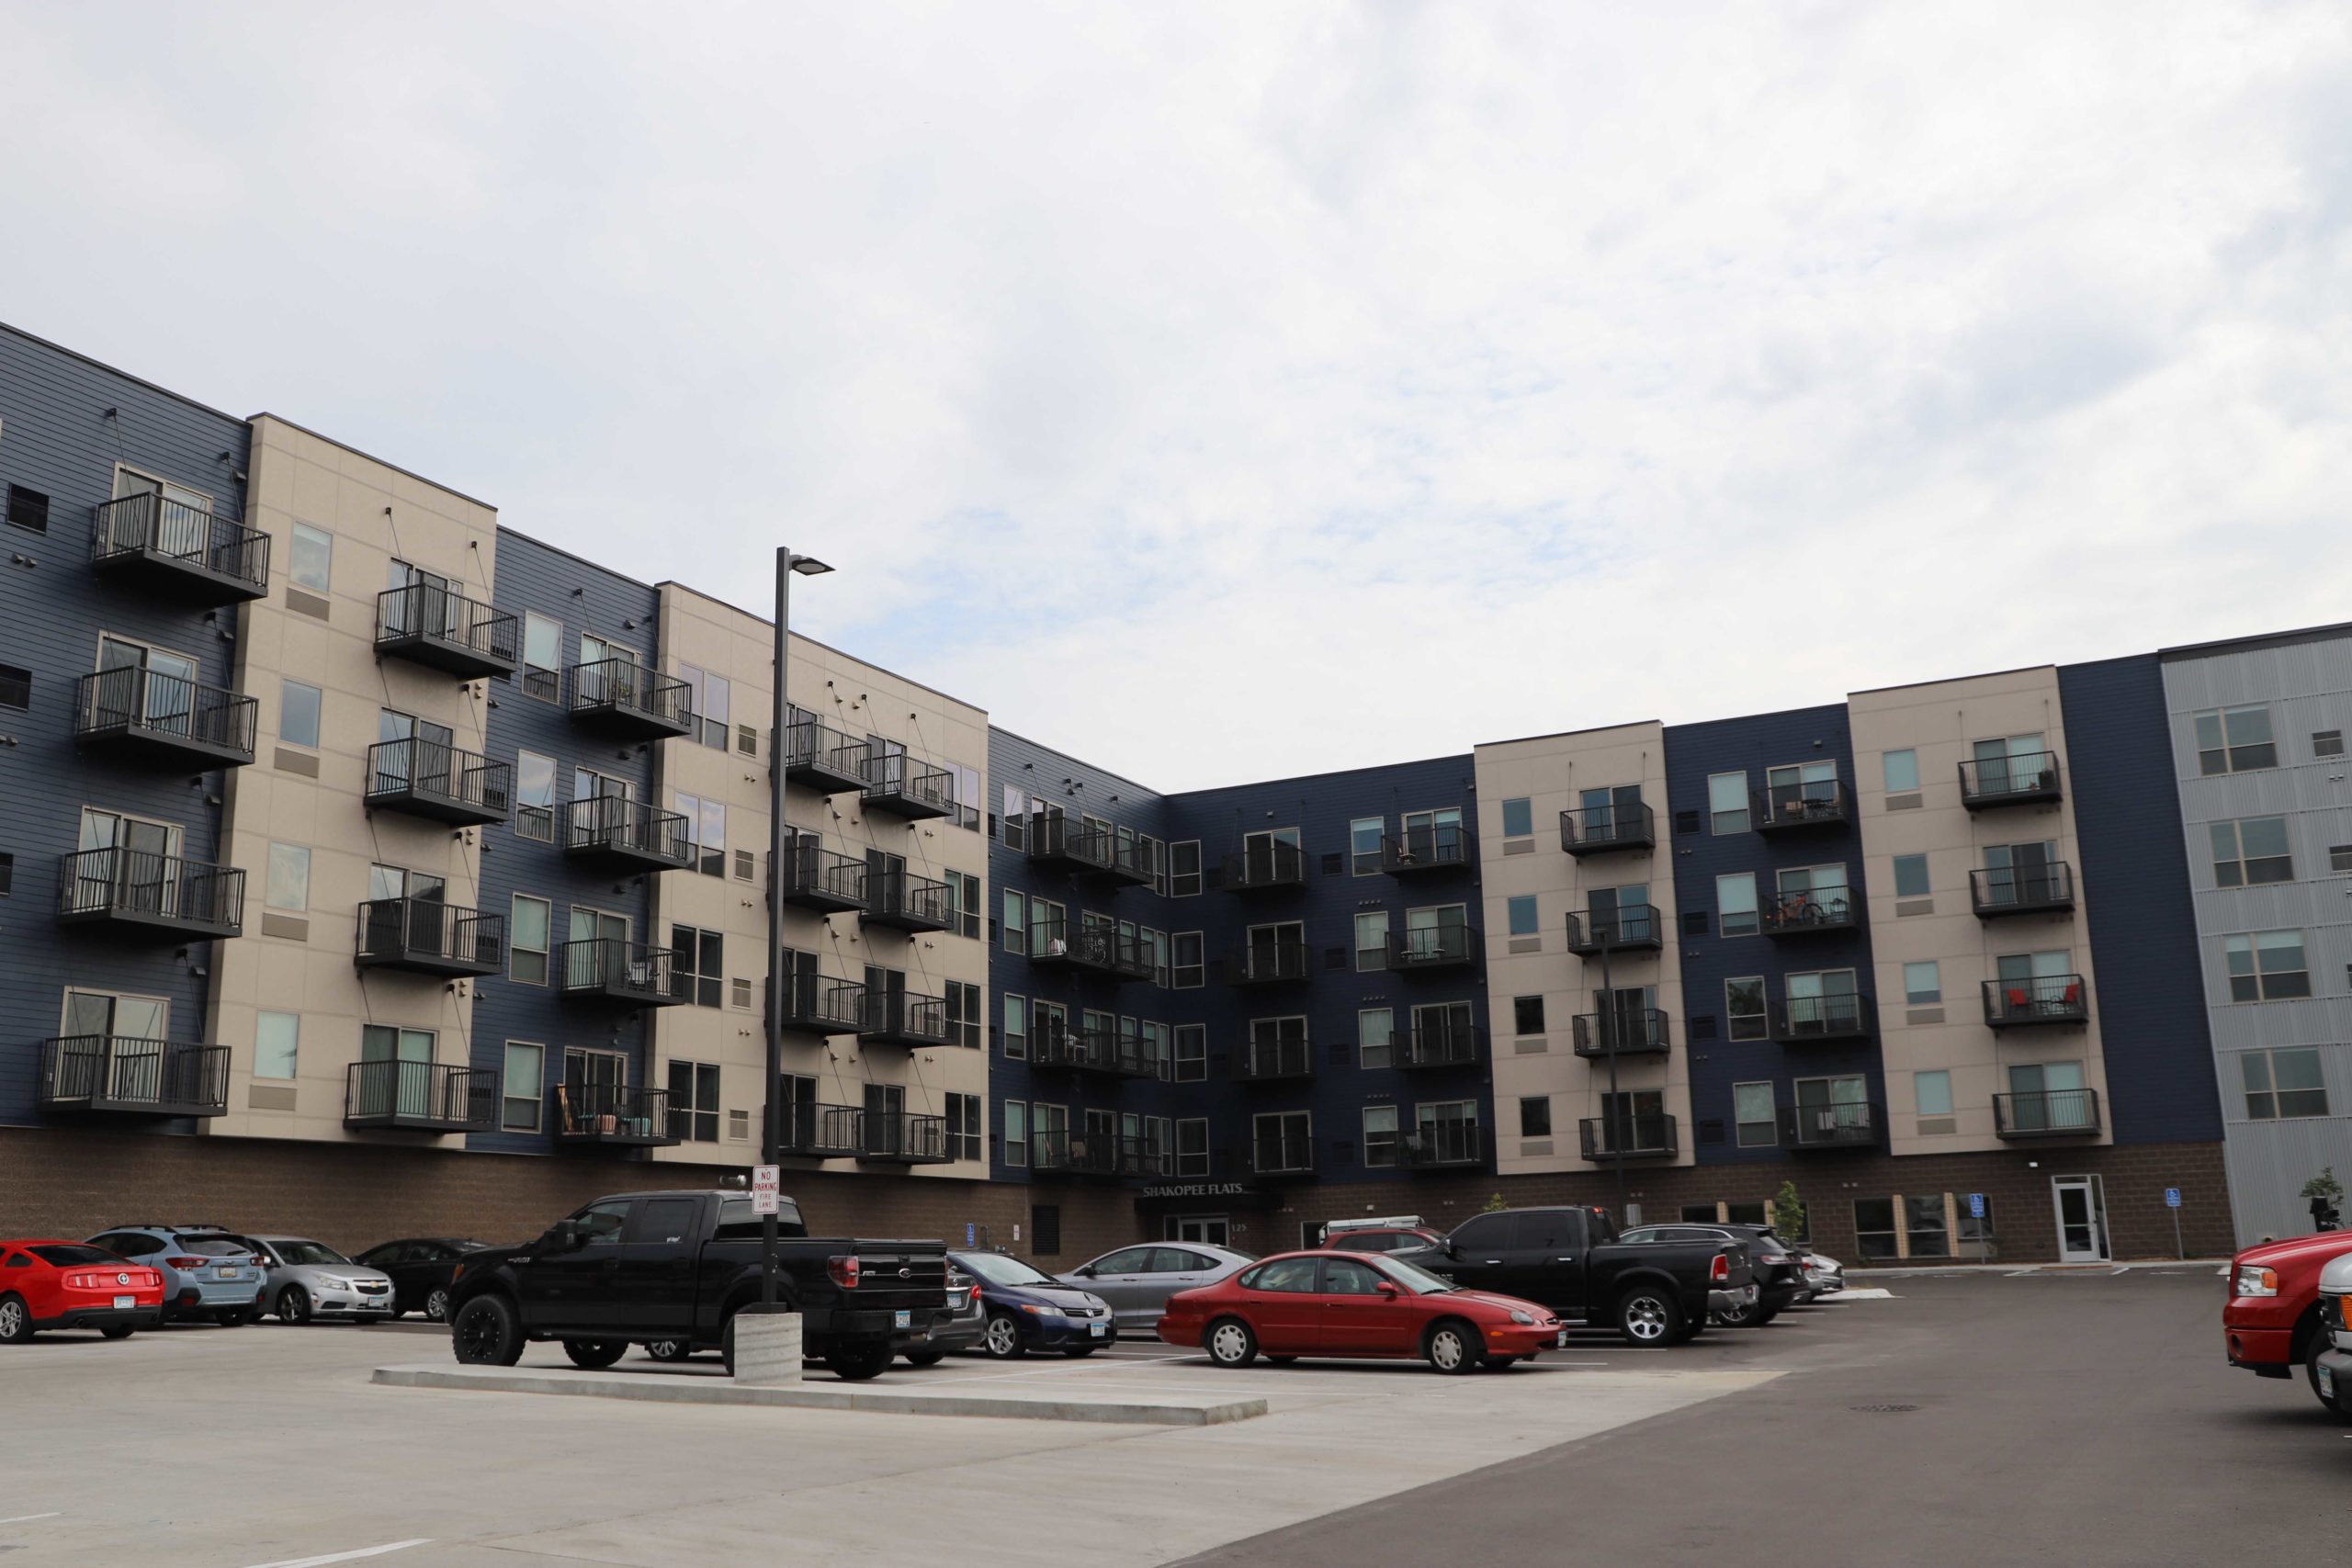 Blue and cream colored, L-shaped five-story apartment building and parking lot in Shakopee, MN.